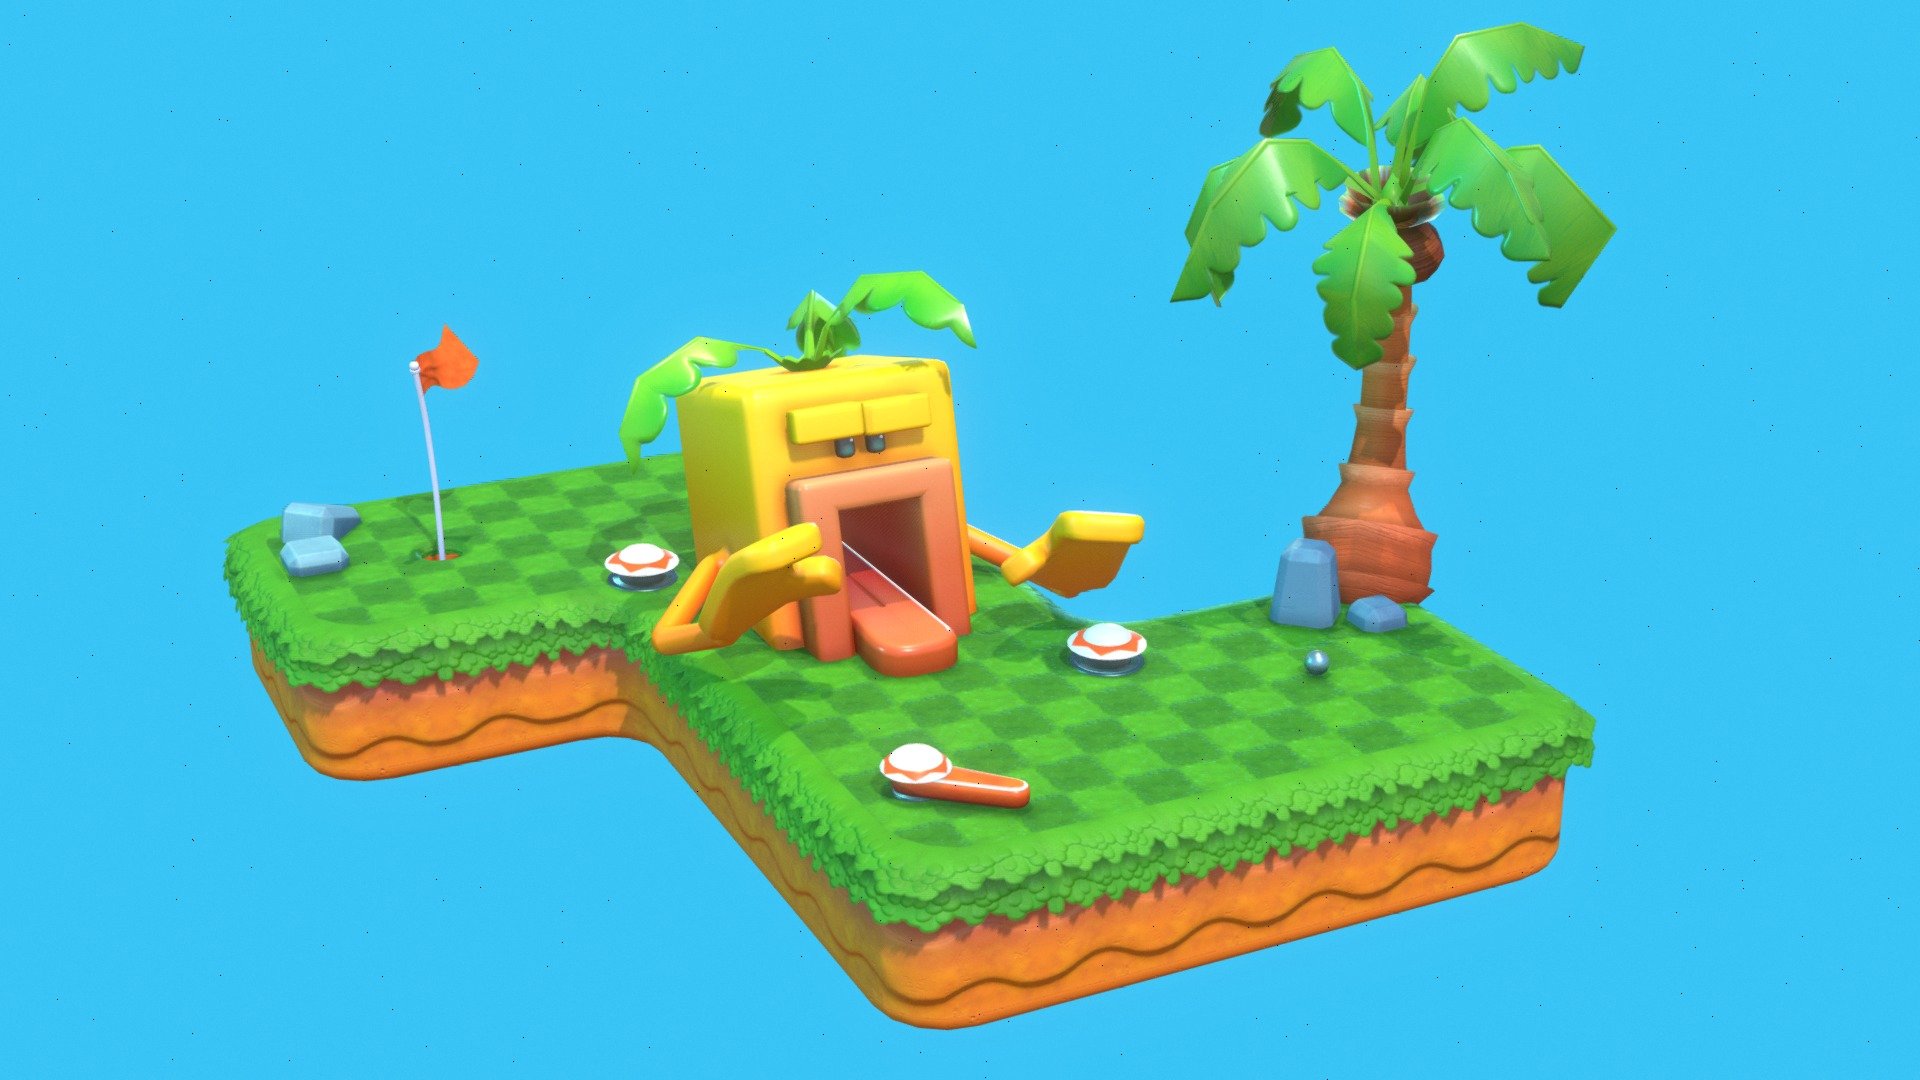 Developed as part of assginment that required to create a scene using modular assets.

The concept is largely a mock-up of a mini-golf game with pinball elements. To add onto the appeal of these pasttimes, a retro flavor inspired by Nitrome games and Sonic is heavily incoporated into the visual design of the scene, whilst keeping a stylised detailed look to it, which takes cues from Super Mario Odyssey and Kirby Return to Dreamland Deluxe.

Programs used
Maya
Substance Painter - Mini-Pinball Golf - 3D model by RasterZone 3d model